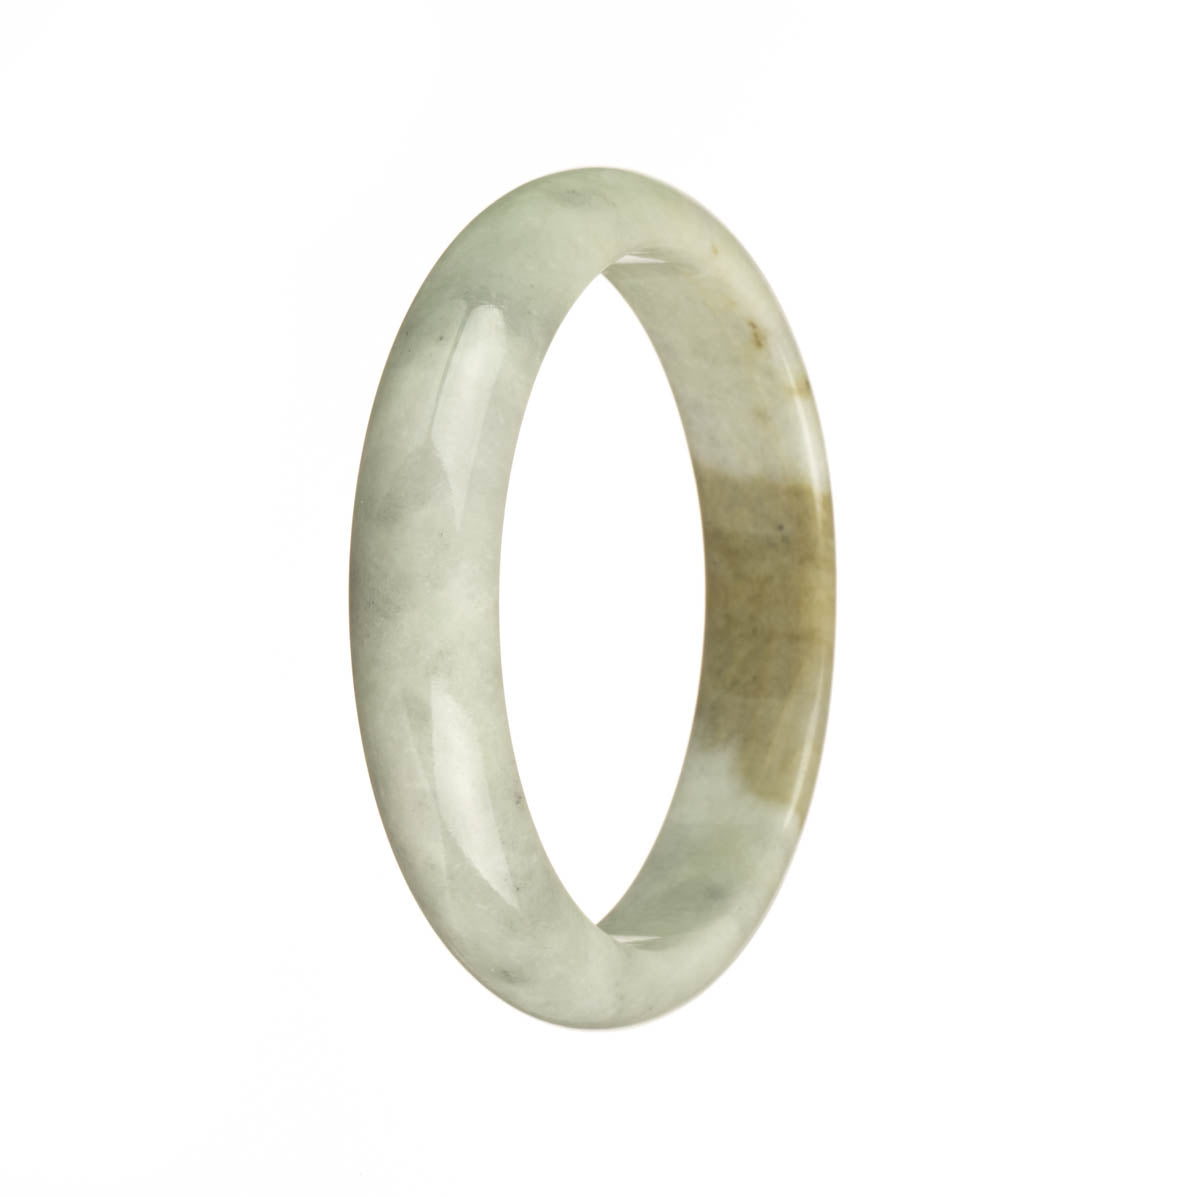 A stunning traditional jade bangle in a pale green and brown color with a unique grey pattern, measuring 56mm in a half moon shape. Handcrafted and authentic, this bangle from MAYS GEMS is a true gem.